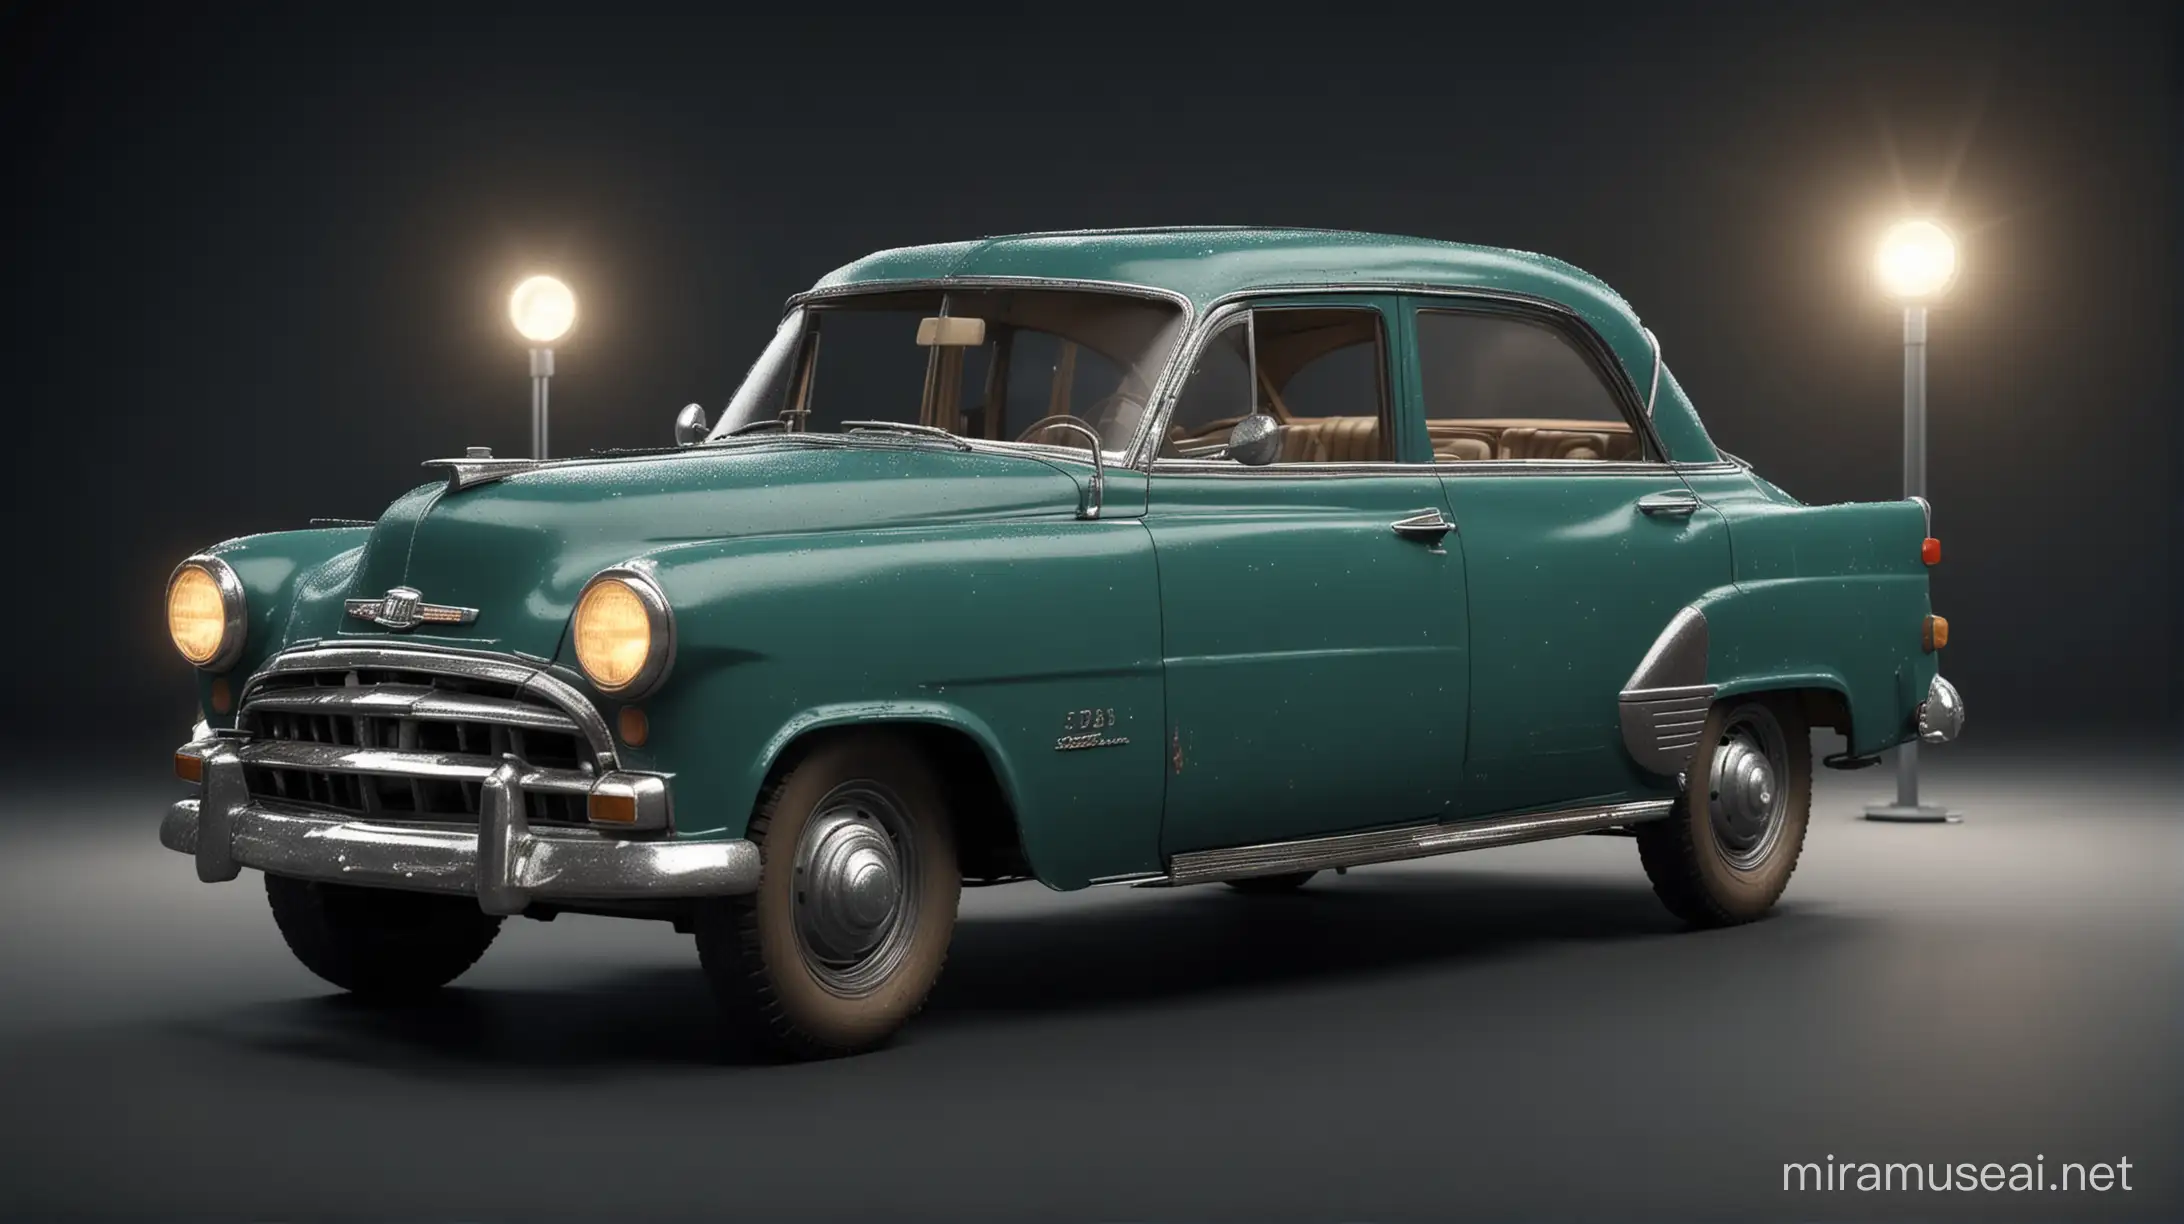 Ultrarealistic 3D Render of Vintage Toy Car in Nocturnal Ambiance